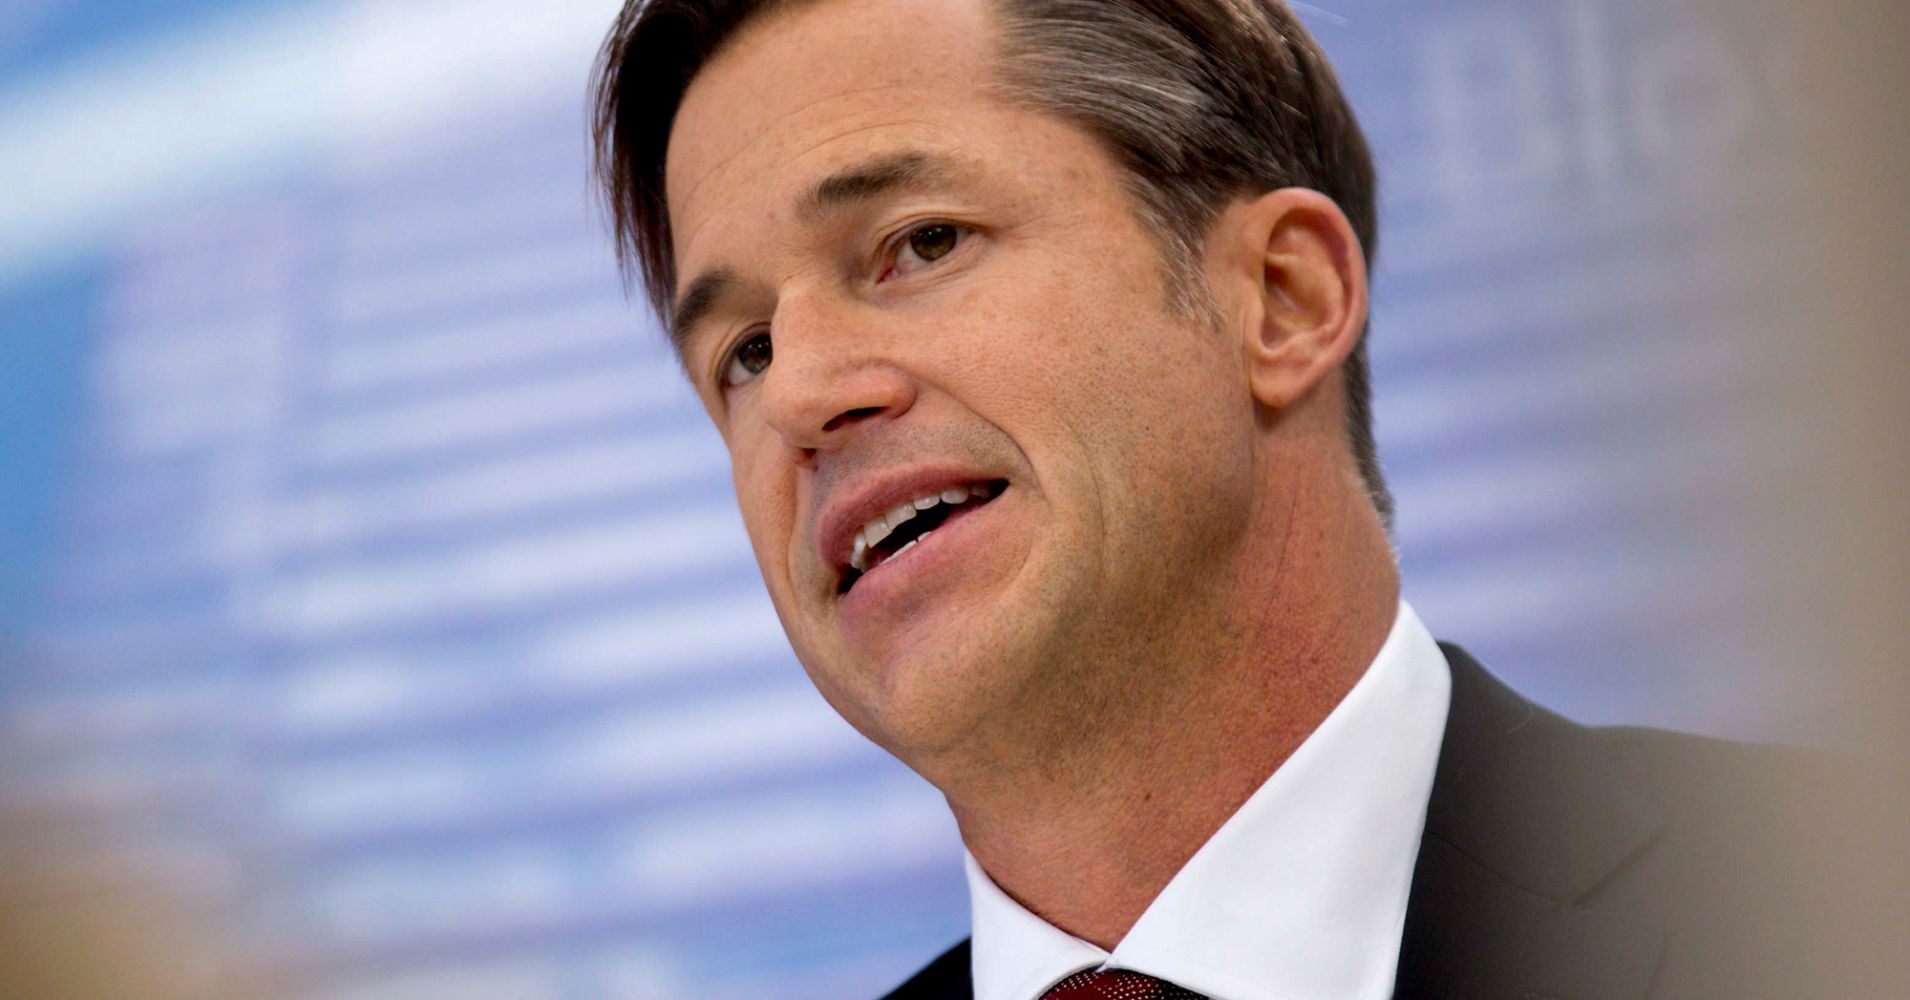 Zillow's home-flipping plan is too risky even with a new CEO